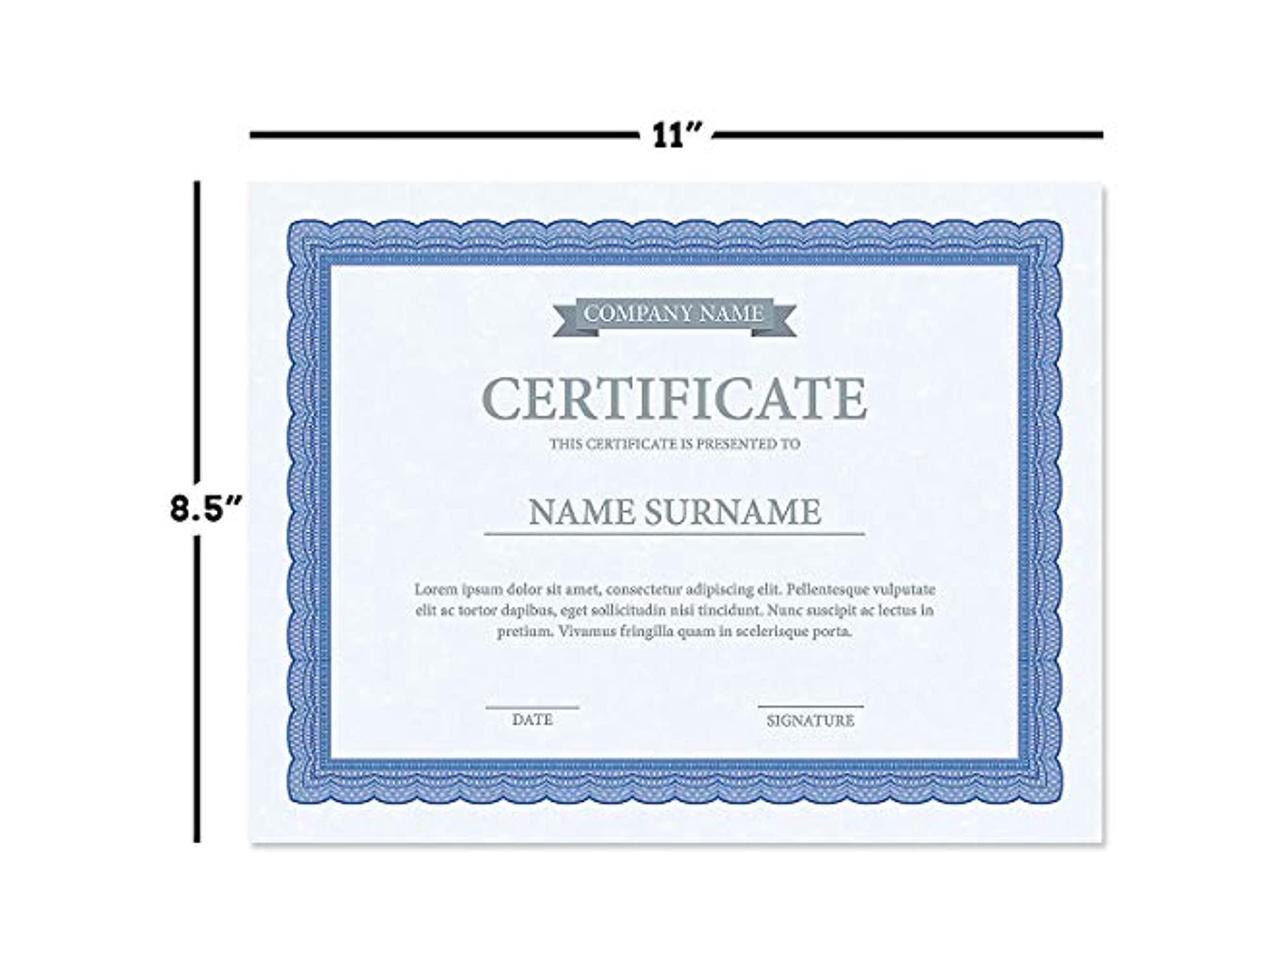 for Office Pack of 100 8-1/2 x 11 on 60 lb Graduation Laser & Inkjet Printer Compatible Stock Business Awards School Diplomas Intricate Blue & White Parchment Certificate Papers